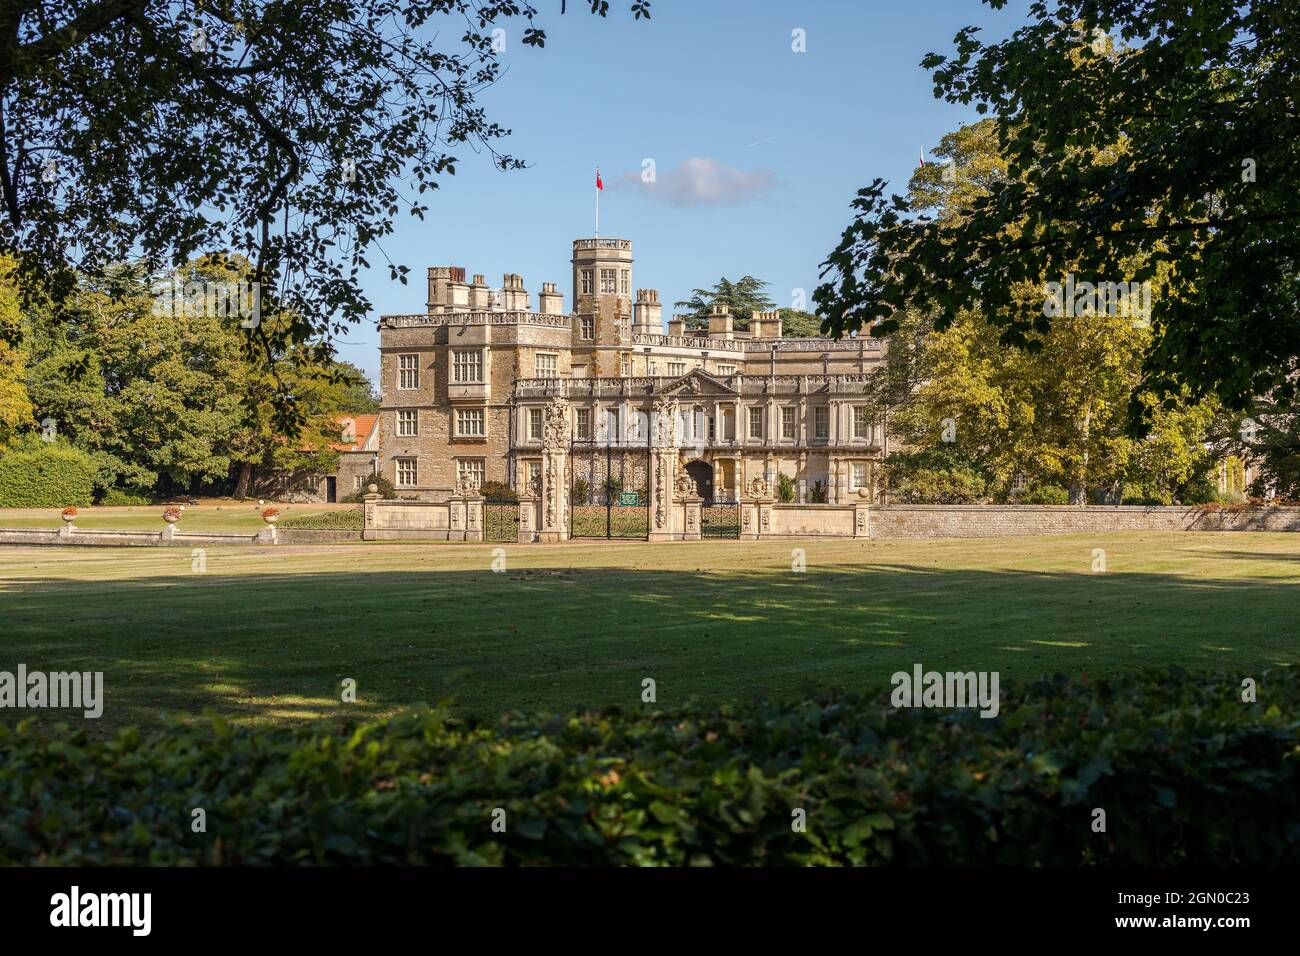 Castle Ashby House, Northamptonshire, England, UK.  Ancestral home of the Marquess of Northampton Stock Photo